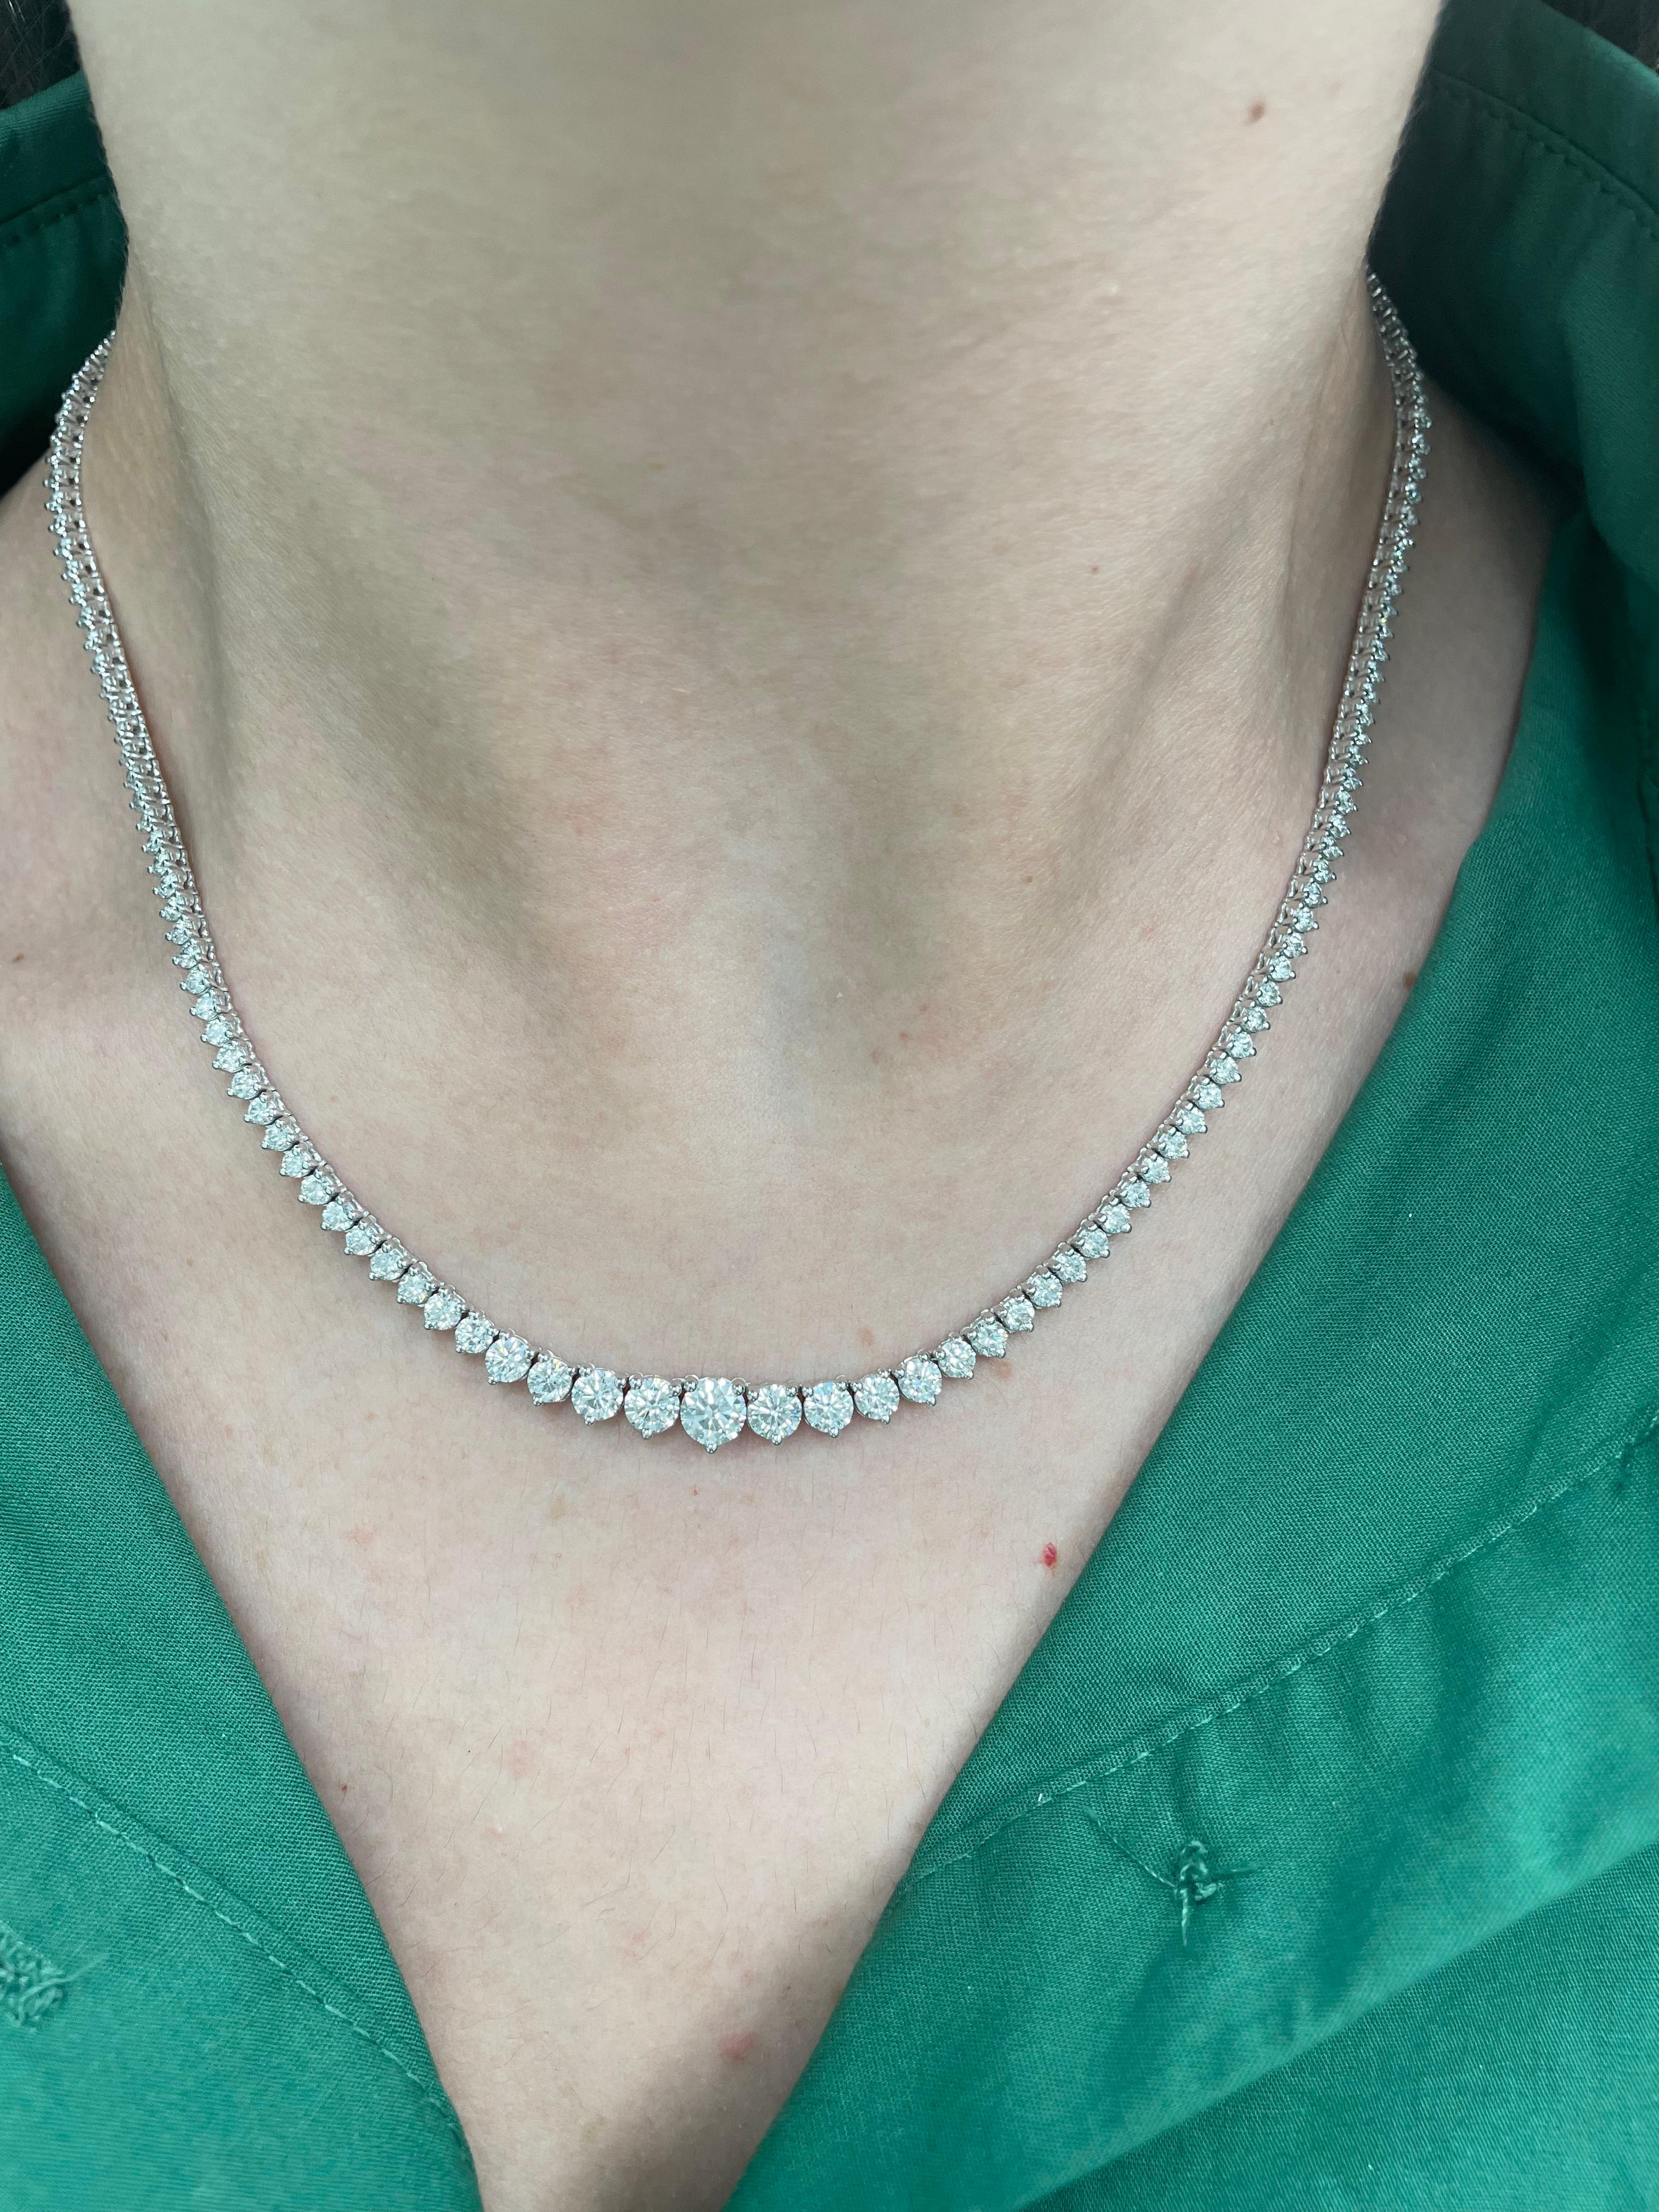 Beautiful and classic diamond tennis riviera necklace, by Alexander Beverly Hills.
9.89 carats of round brilliant diamonds, approximately G/H color and VS2/SI1 clarity. 14k white gold, 20.88 grams, three prong set, 17n.
Accommodated with an